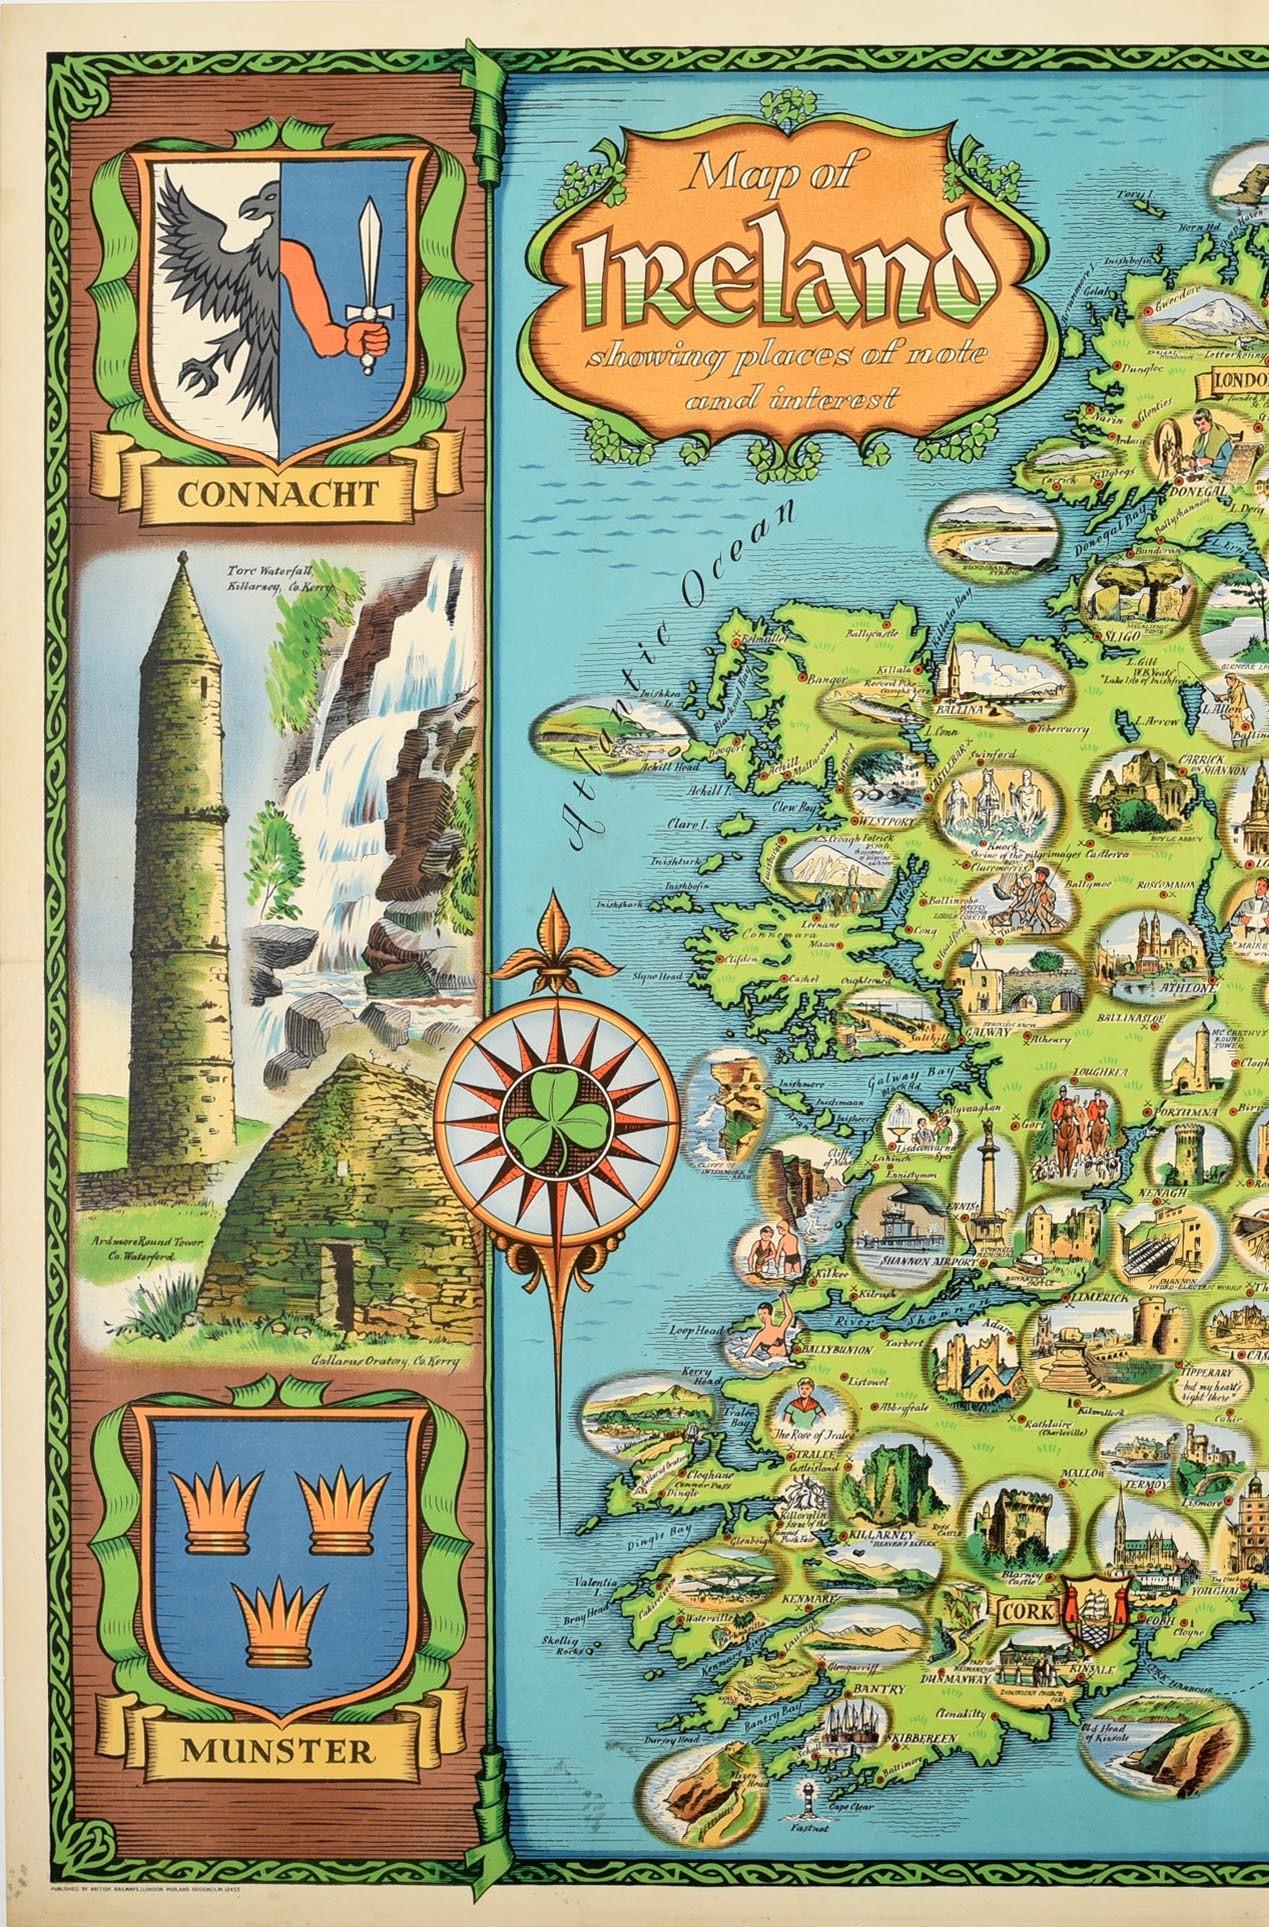 Original Vintage Travel Poster Map Of Ireland Showing Places Of Note & Interest - Print by David William Burley